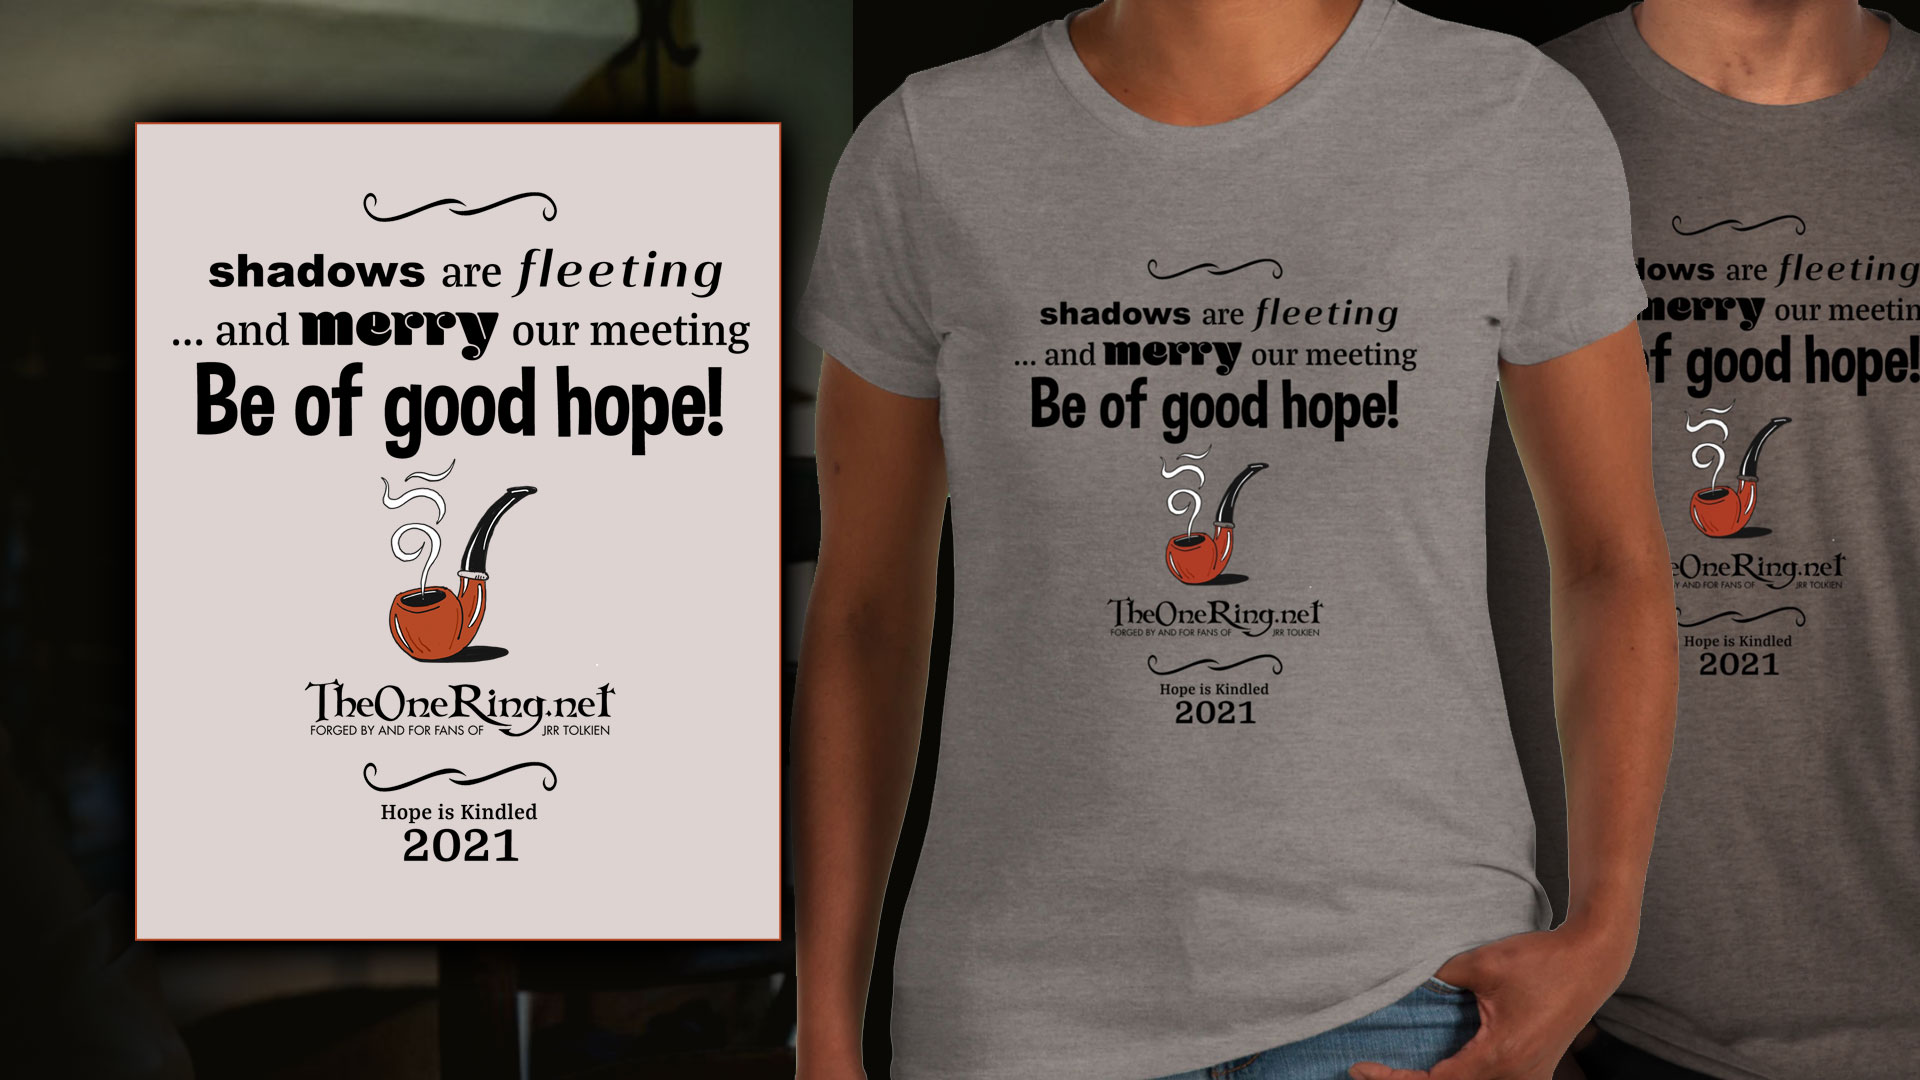 Be Of Good Hope! Our new design – shirts and more